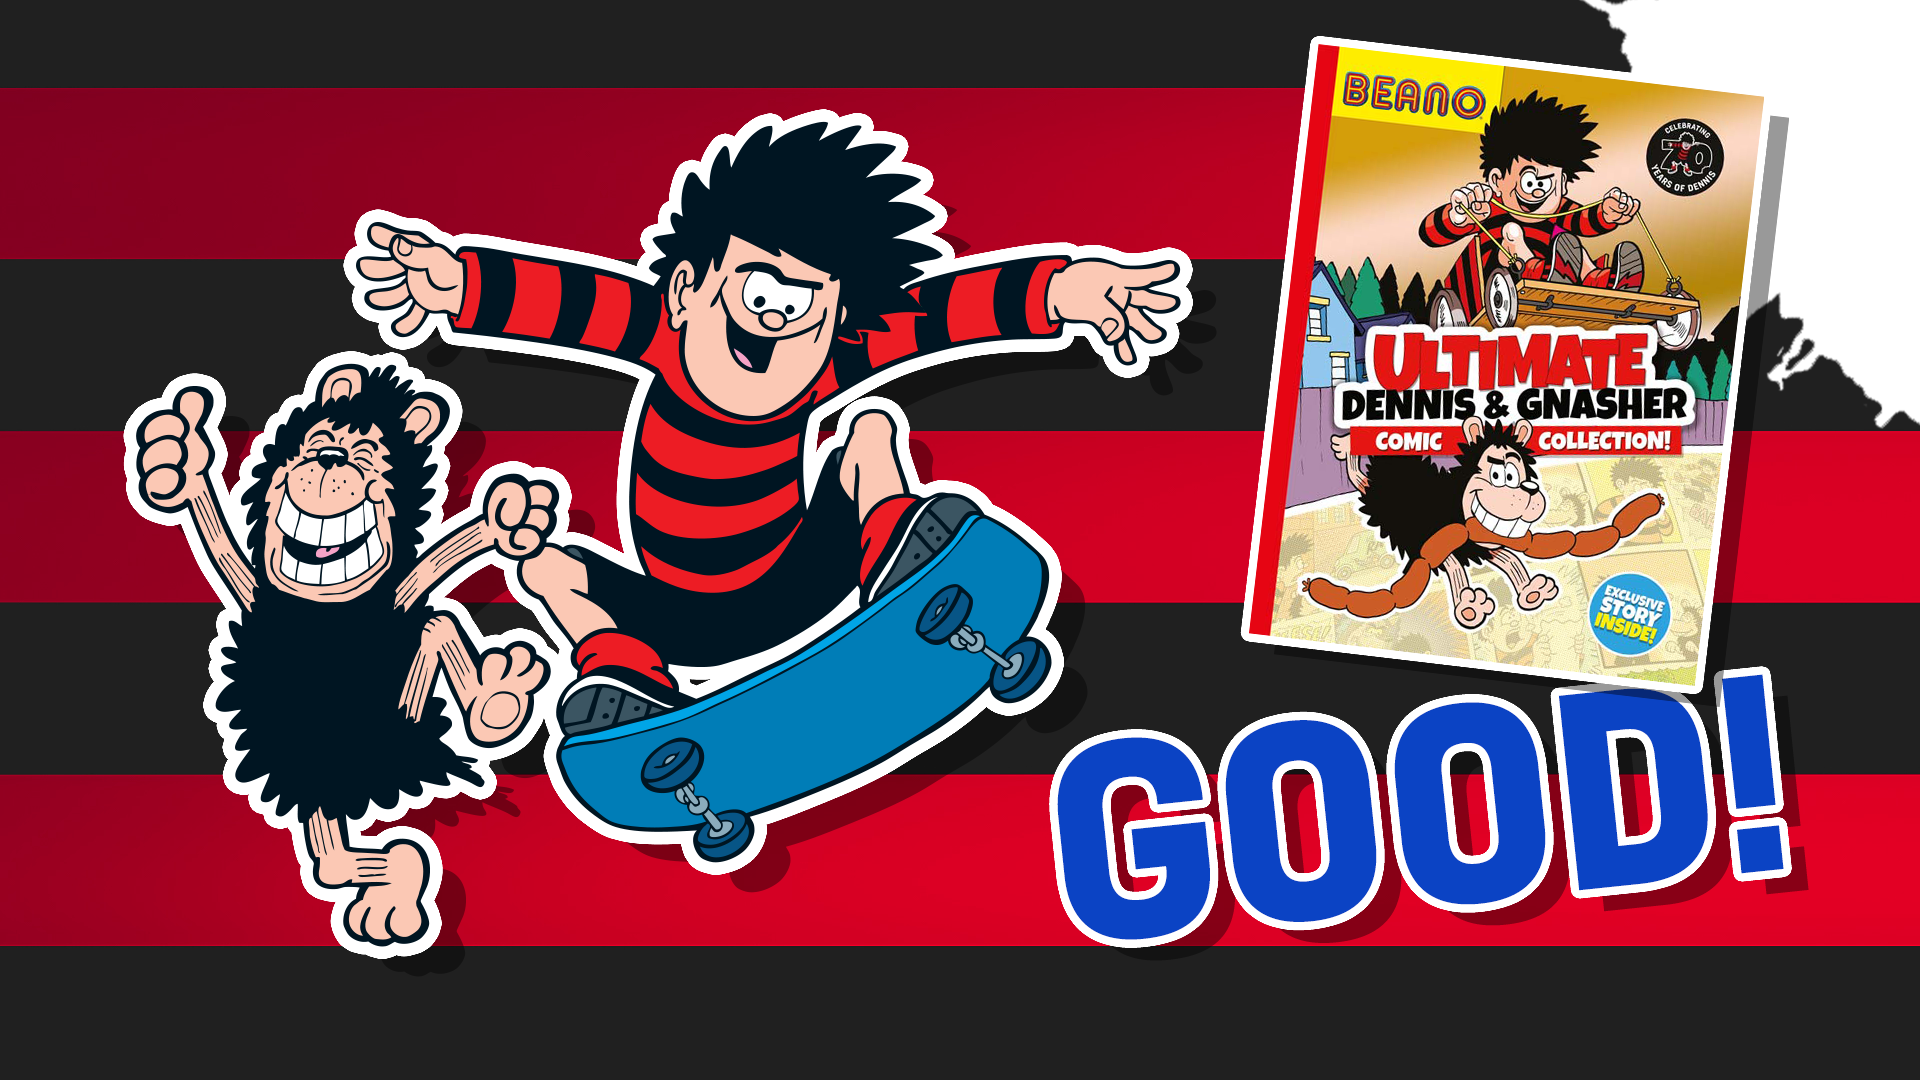 Dennis and Gnasher quiz result: Good